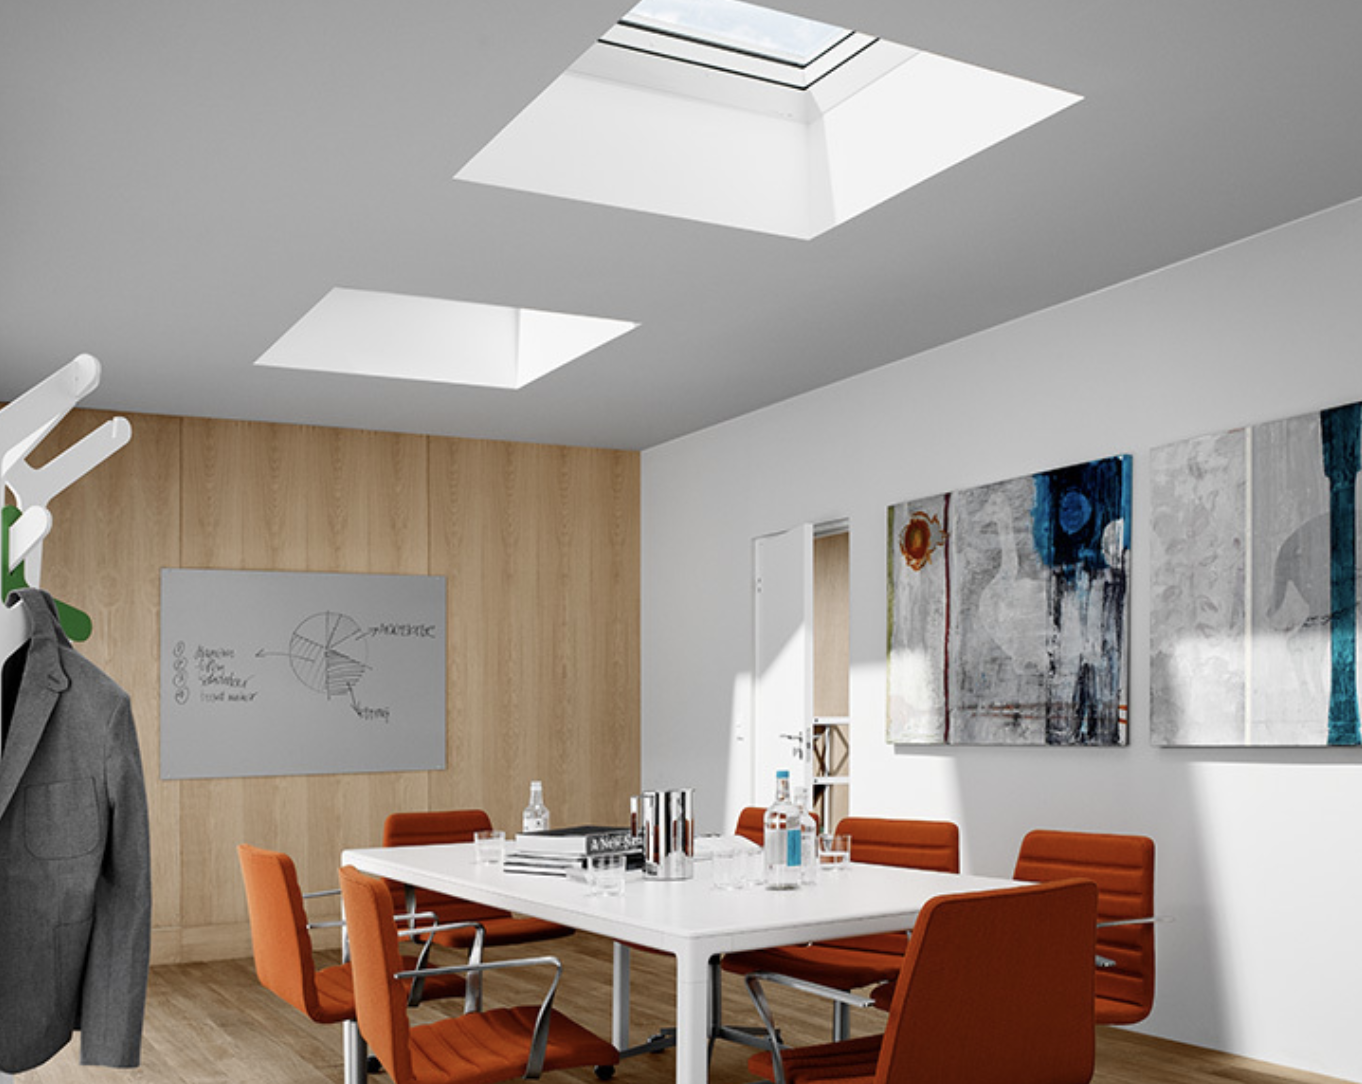 VELUX Commercial fixed skylights by Renaissance Builders. Renaissance Builders San Jose (408)720-1100